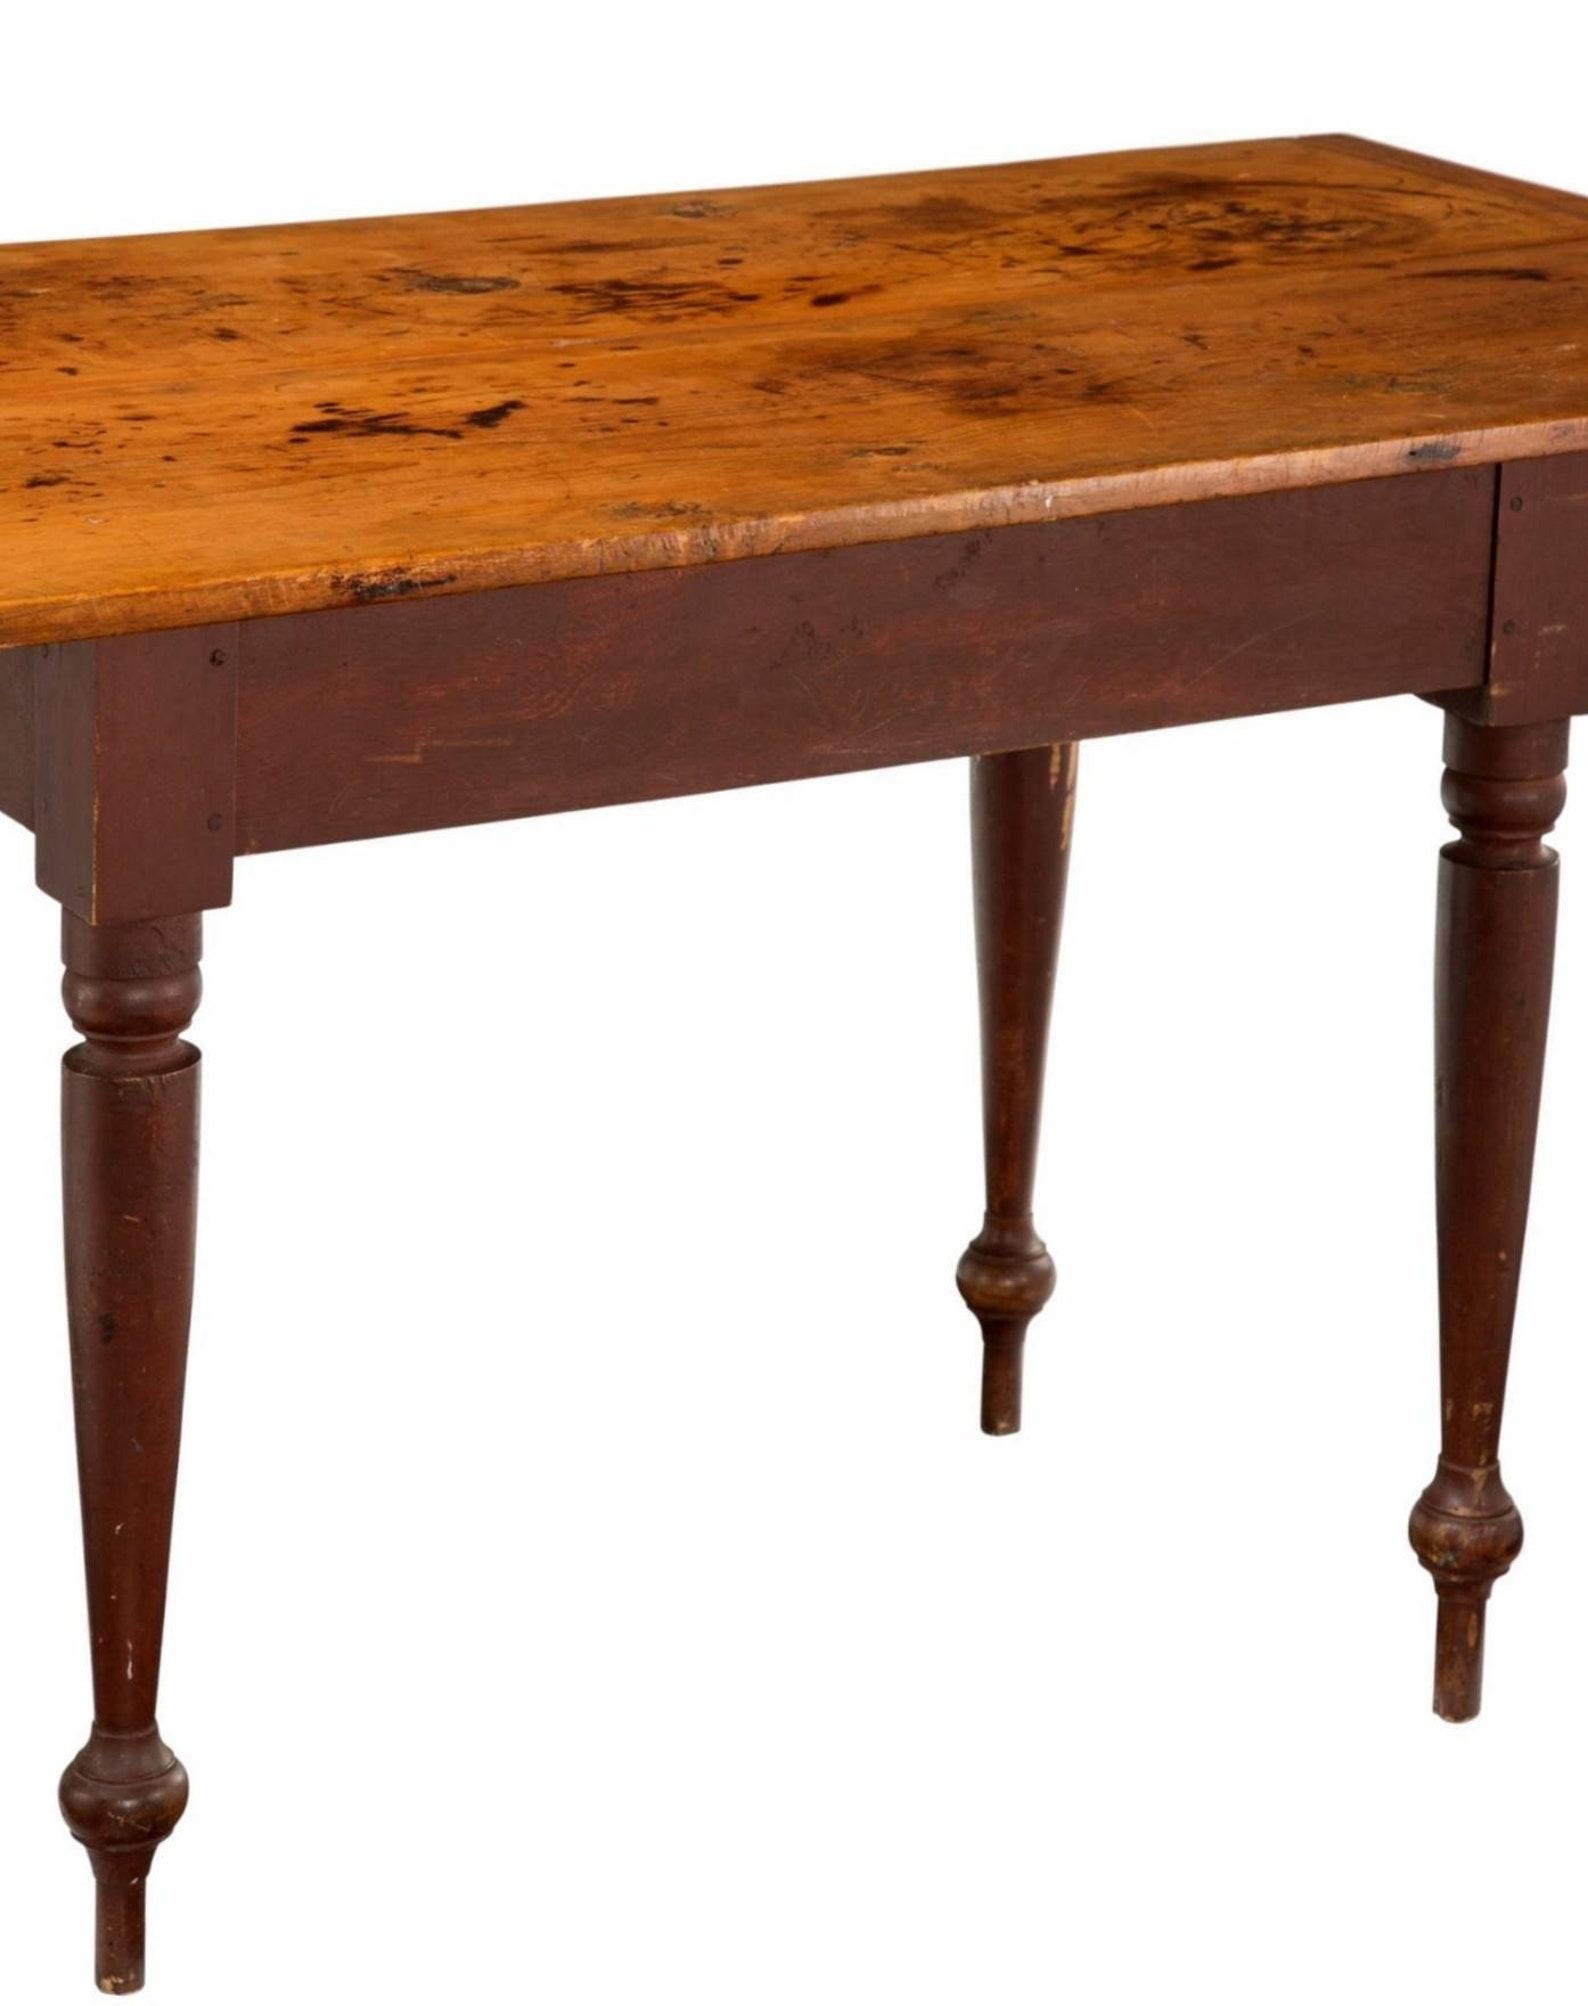 Hand-Crafted Early 19th Century American Farmhouse Harvest Work Table For Sale